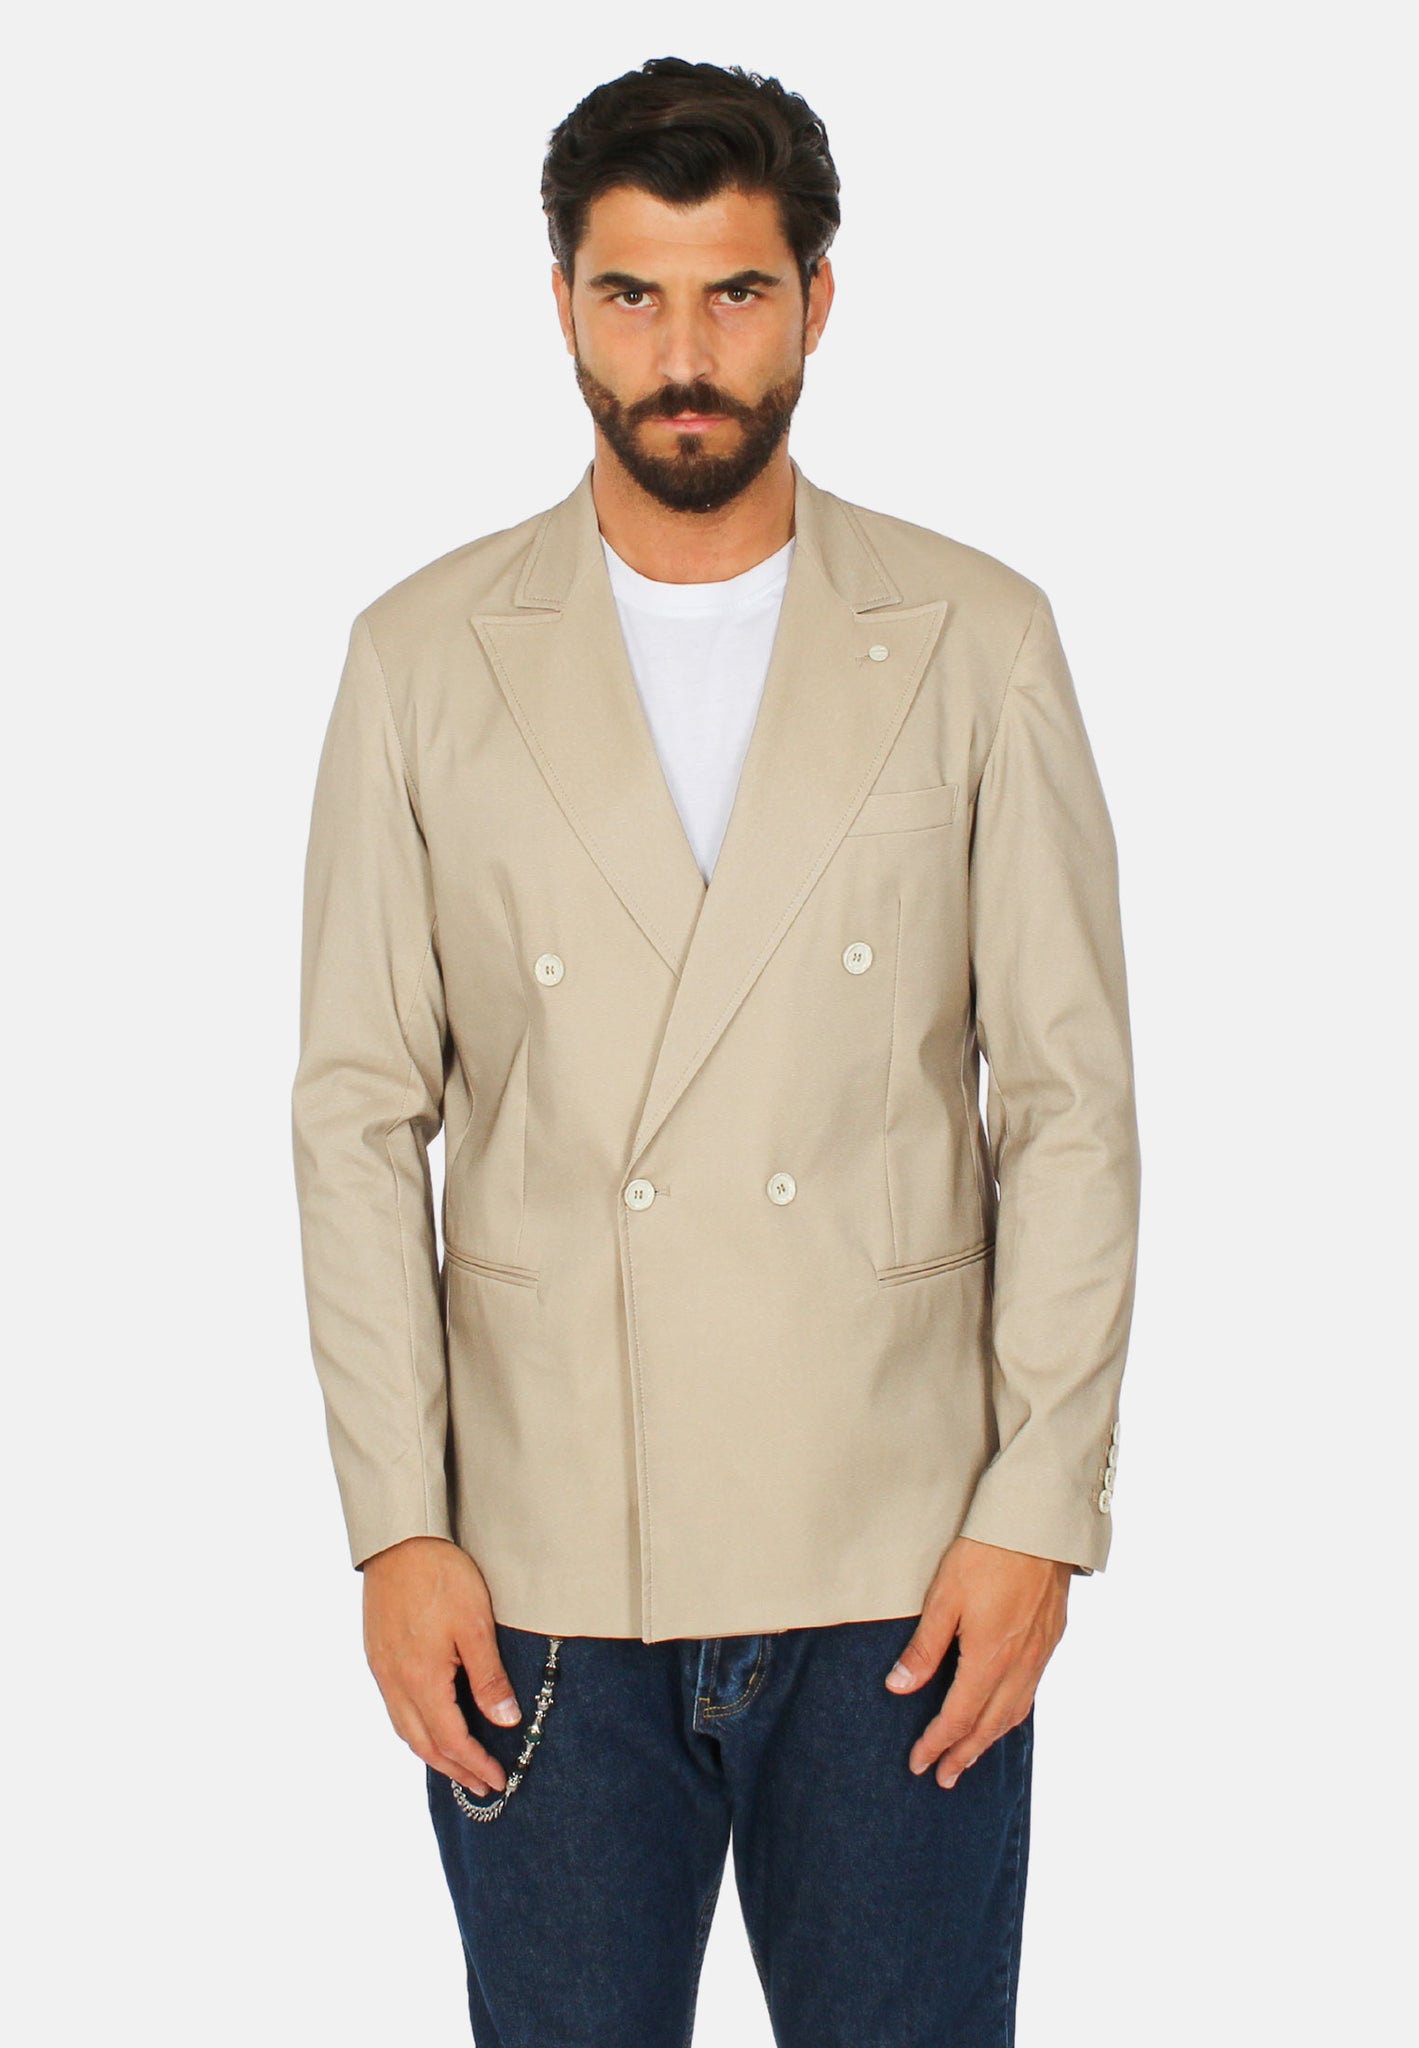 Lightweight double-breasted jacket